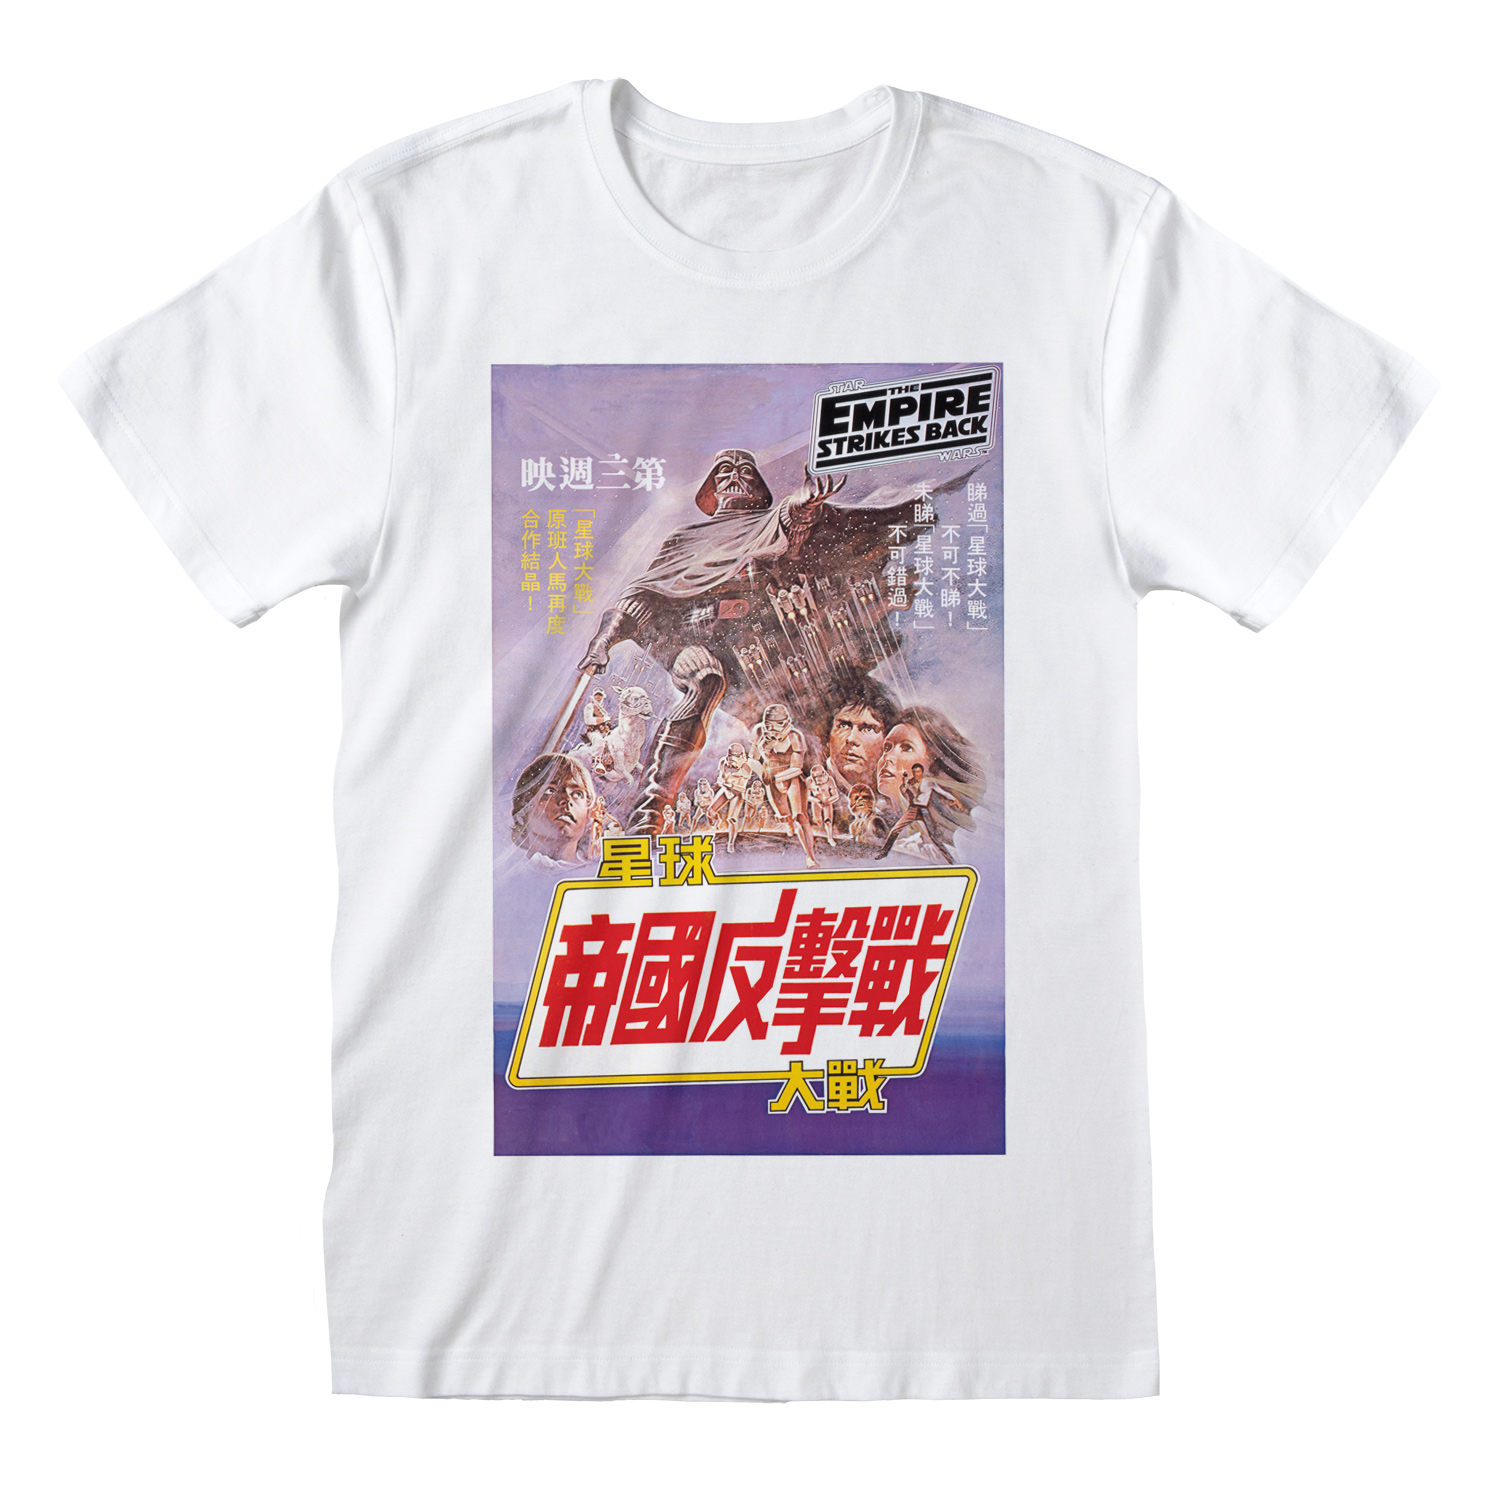 The Empire Strikes Back Japanese T-shirt - wearyoutry.com